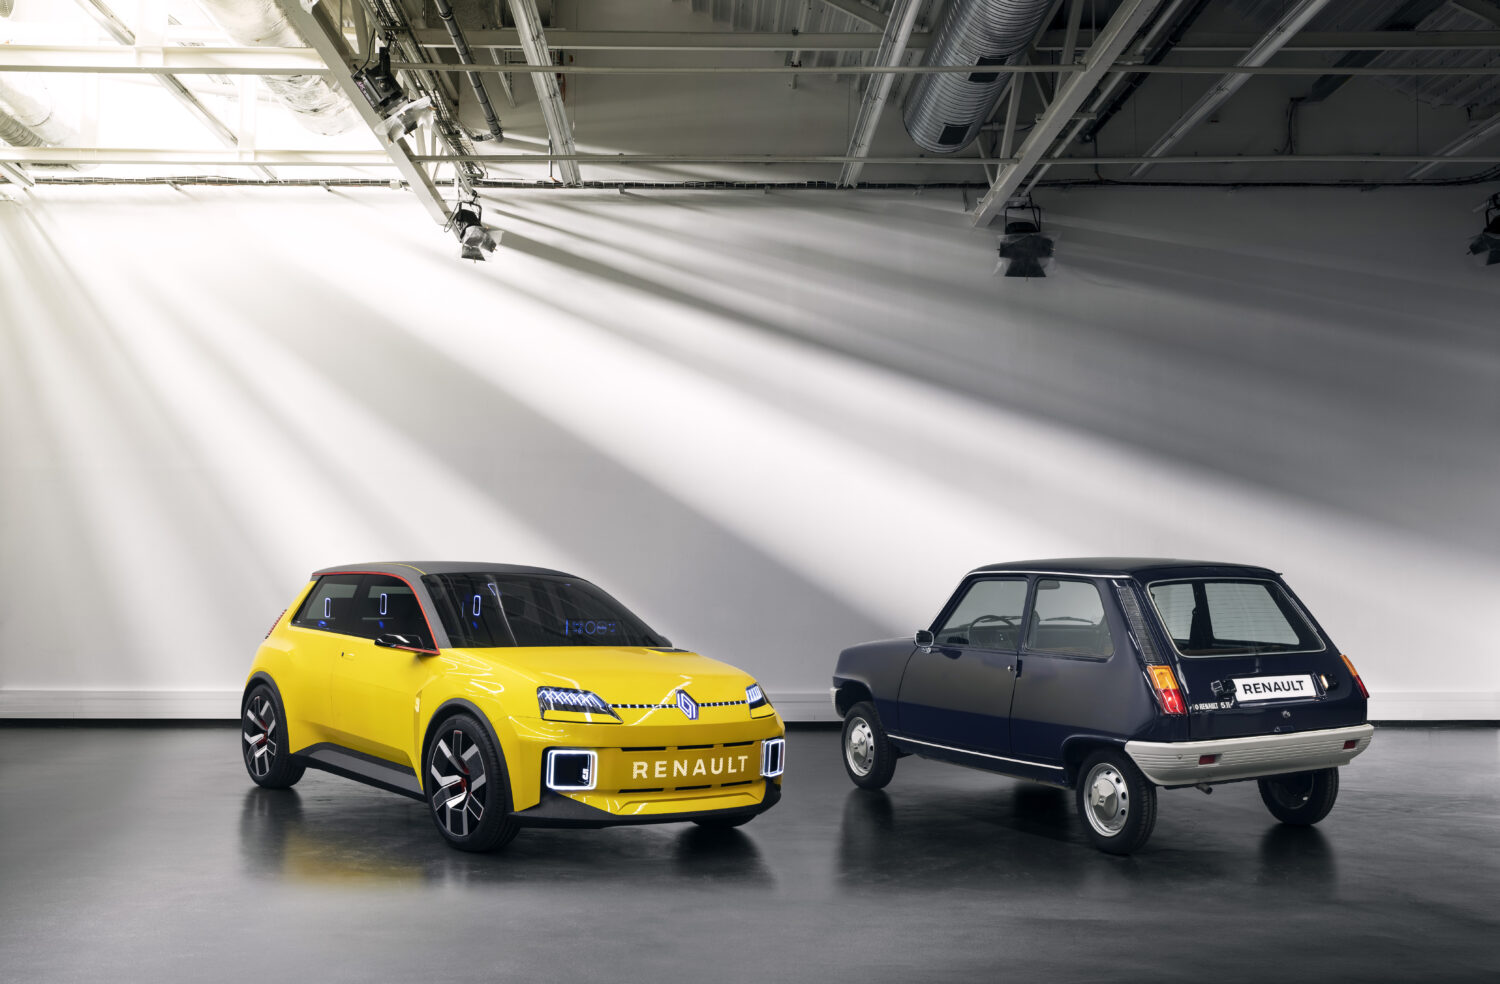 2021 - RENAULT 5 PROTOTYPE AND RENAULT 5 TL